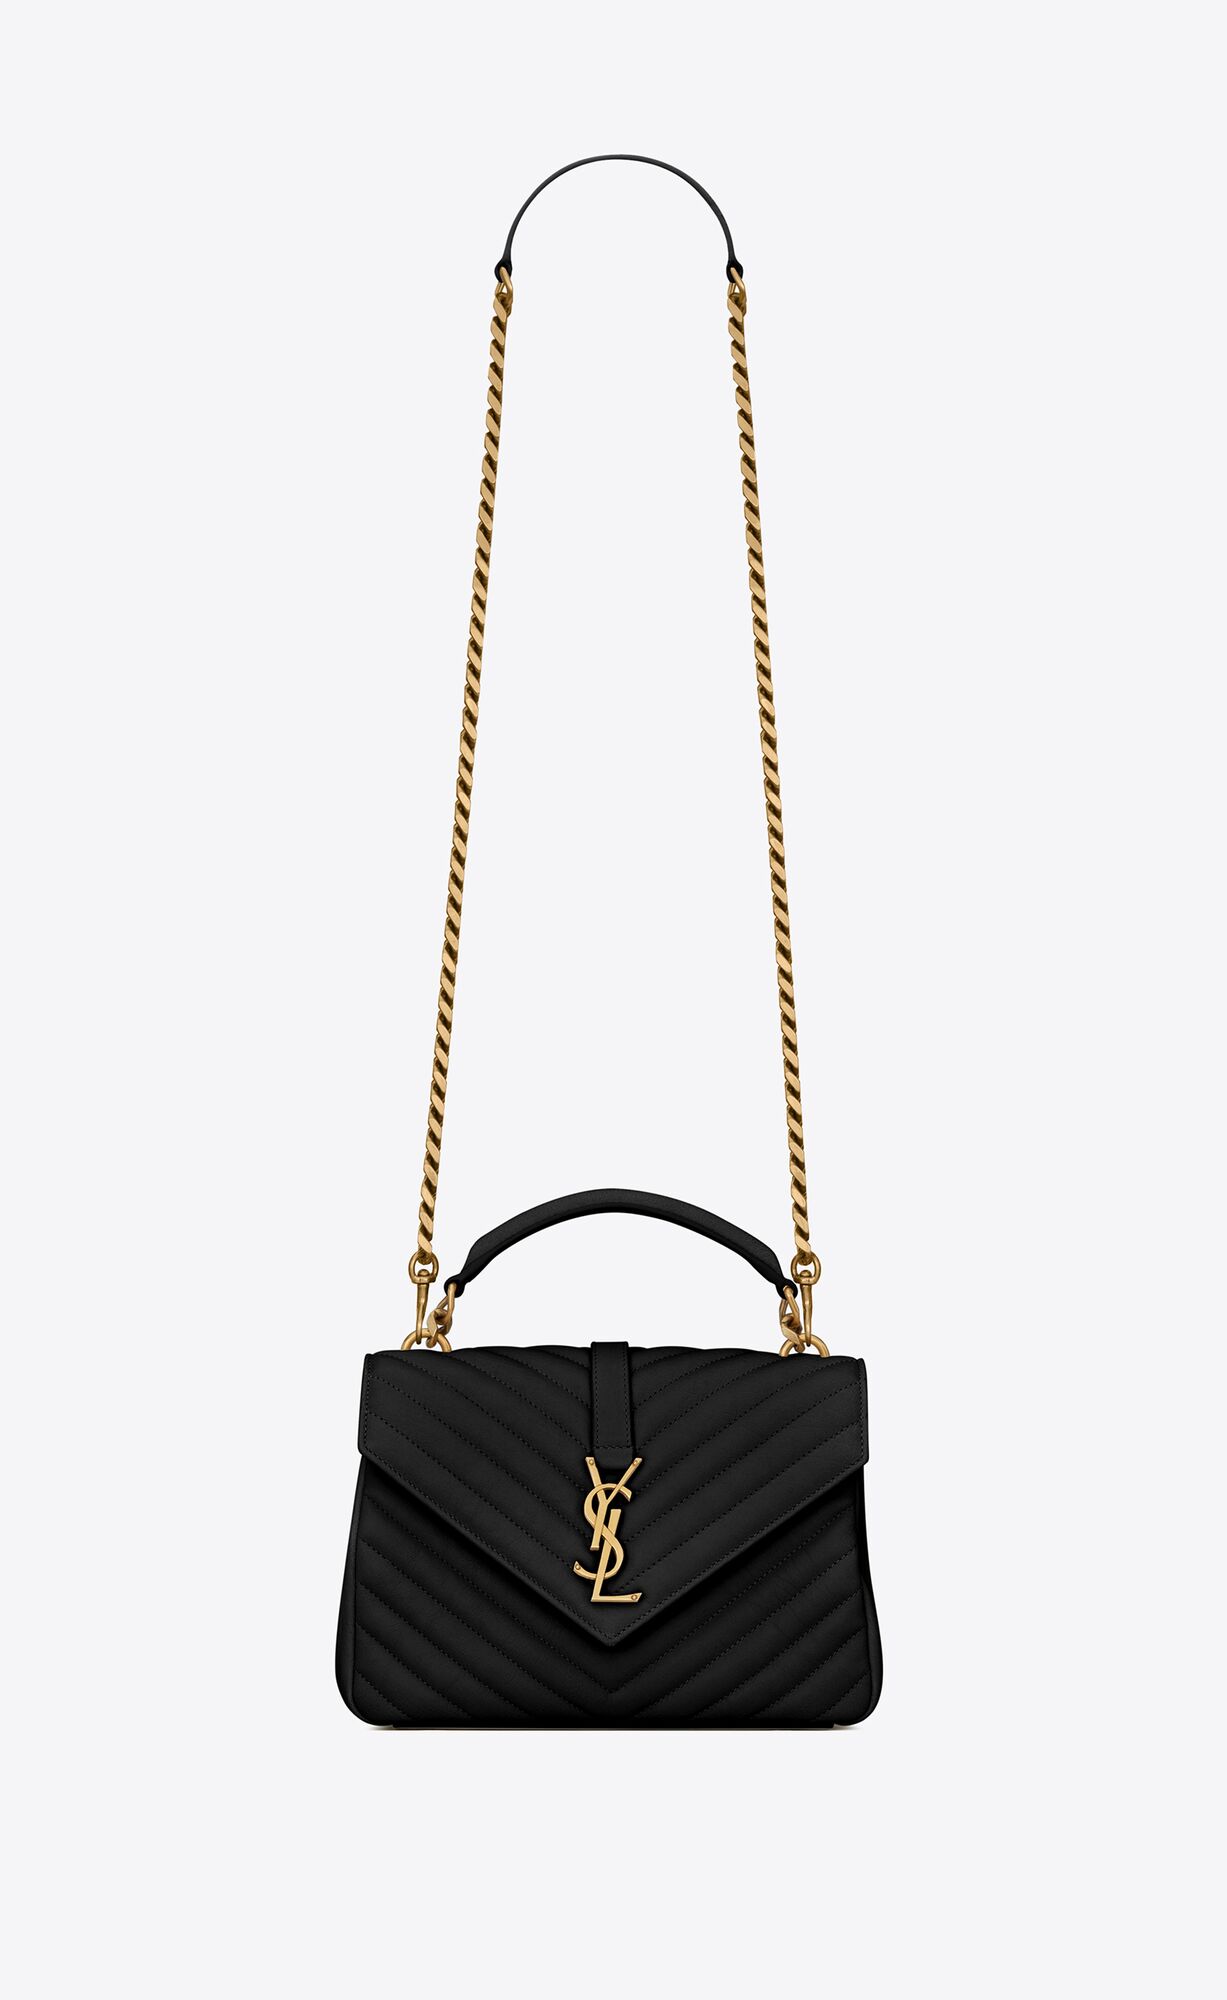 Saint Laurent College Medium Chain Bag In Quilted Leather – Black – 600279BRM071000